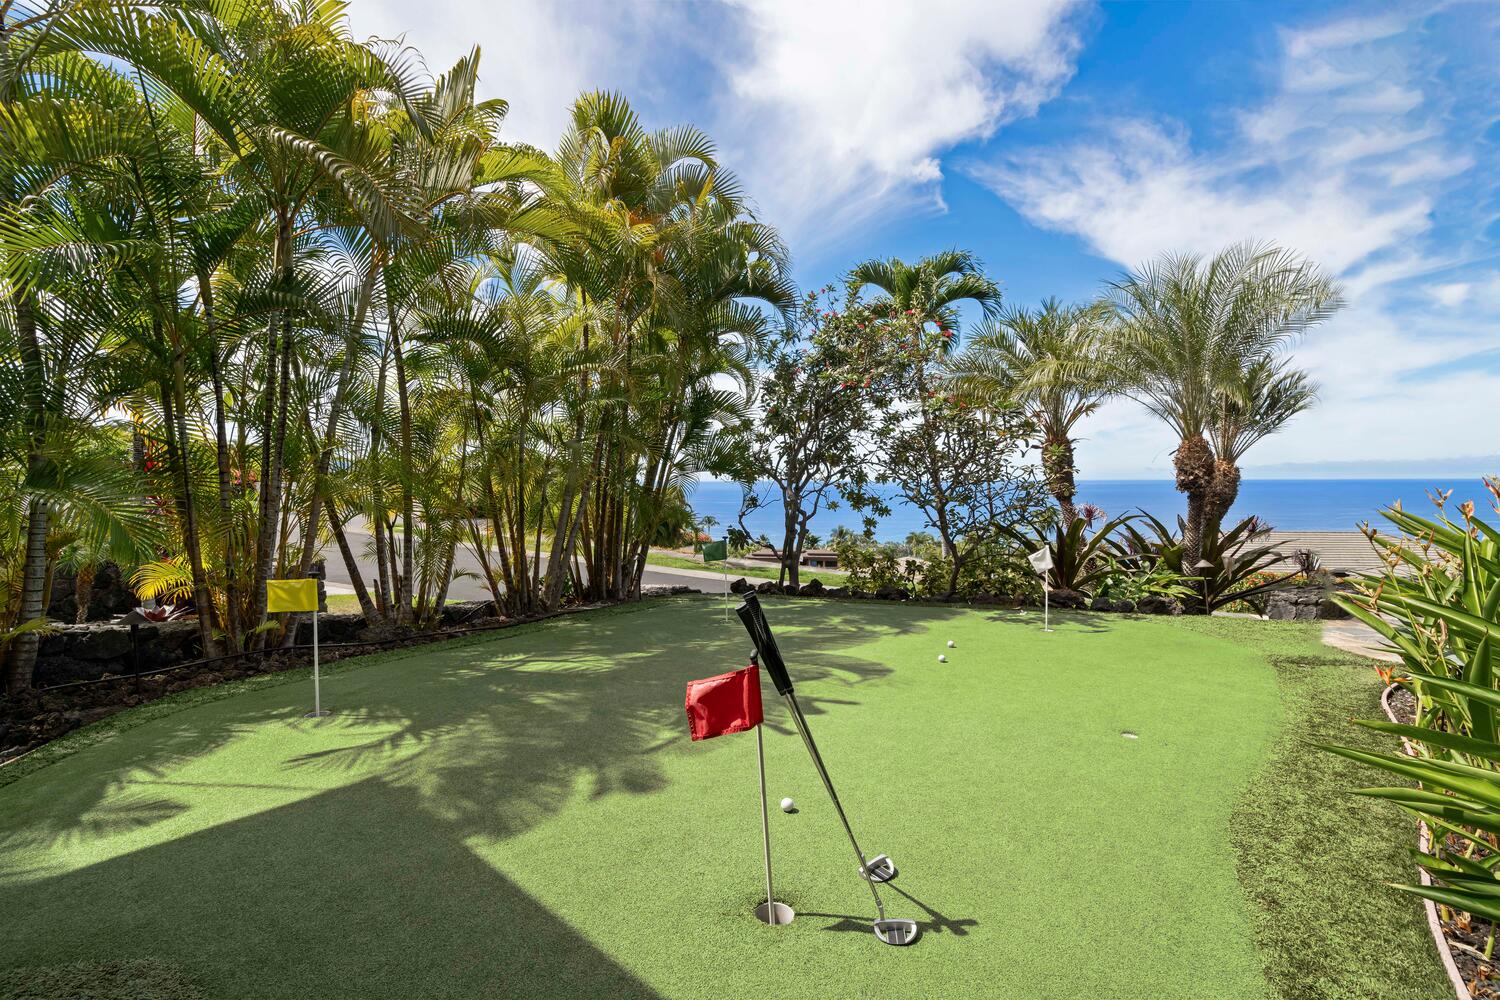 Kailua Kona Vacation Rentals, Island Oasis - Experience the joy of golf anytime, right at home, with our meticulously designed green putting space